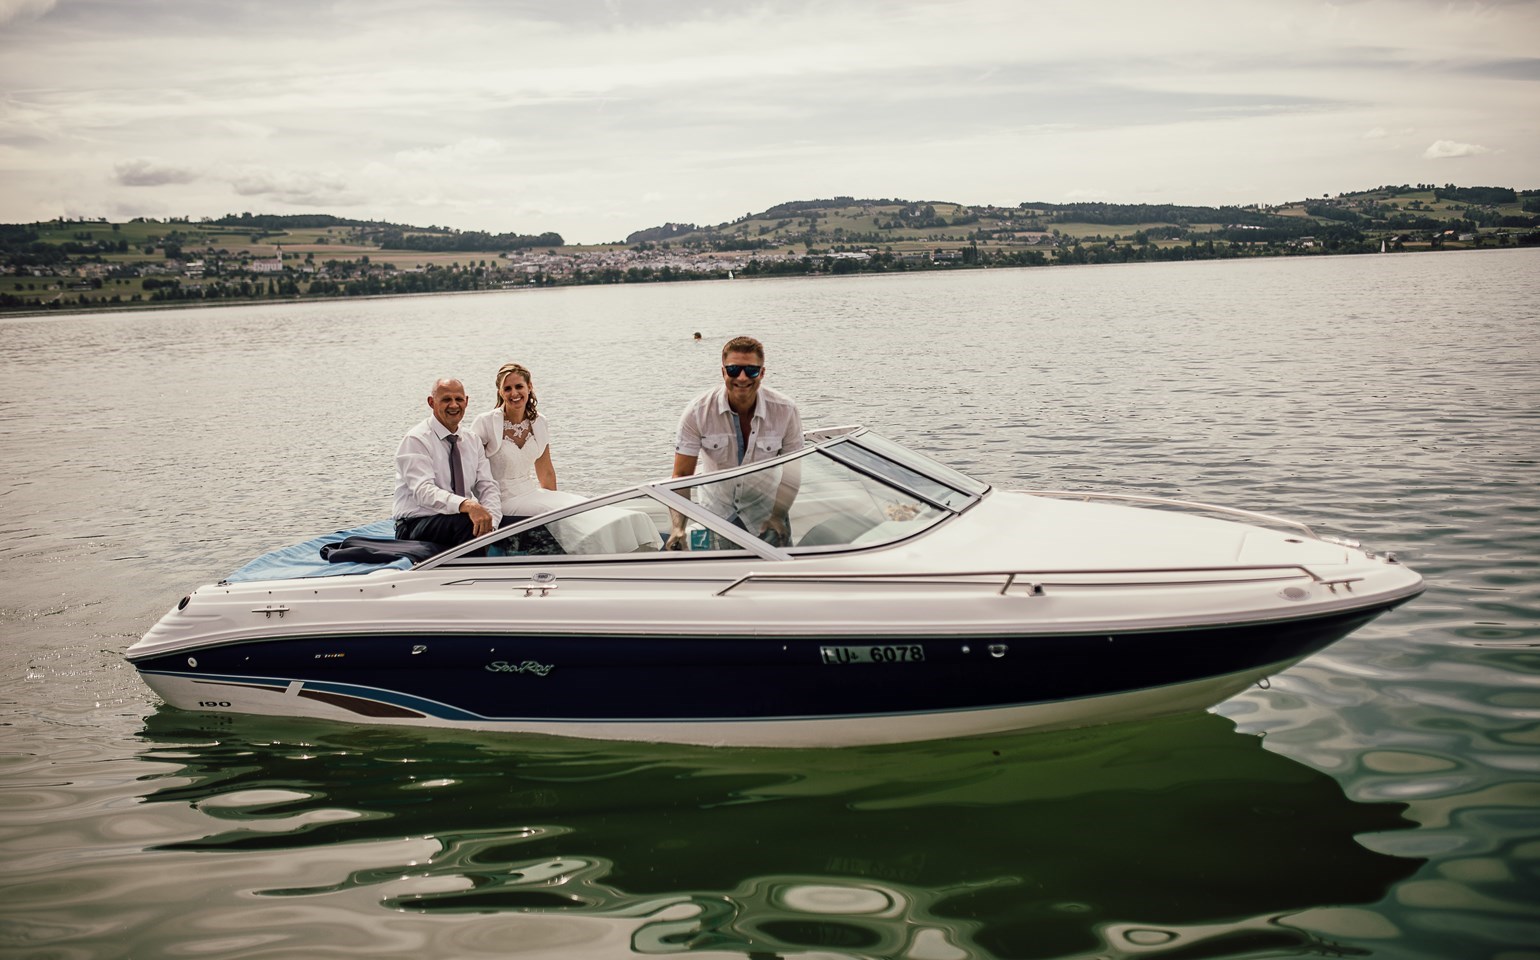 Boat trip for wedding parties at Sonne Seehotel Eich